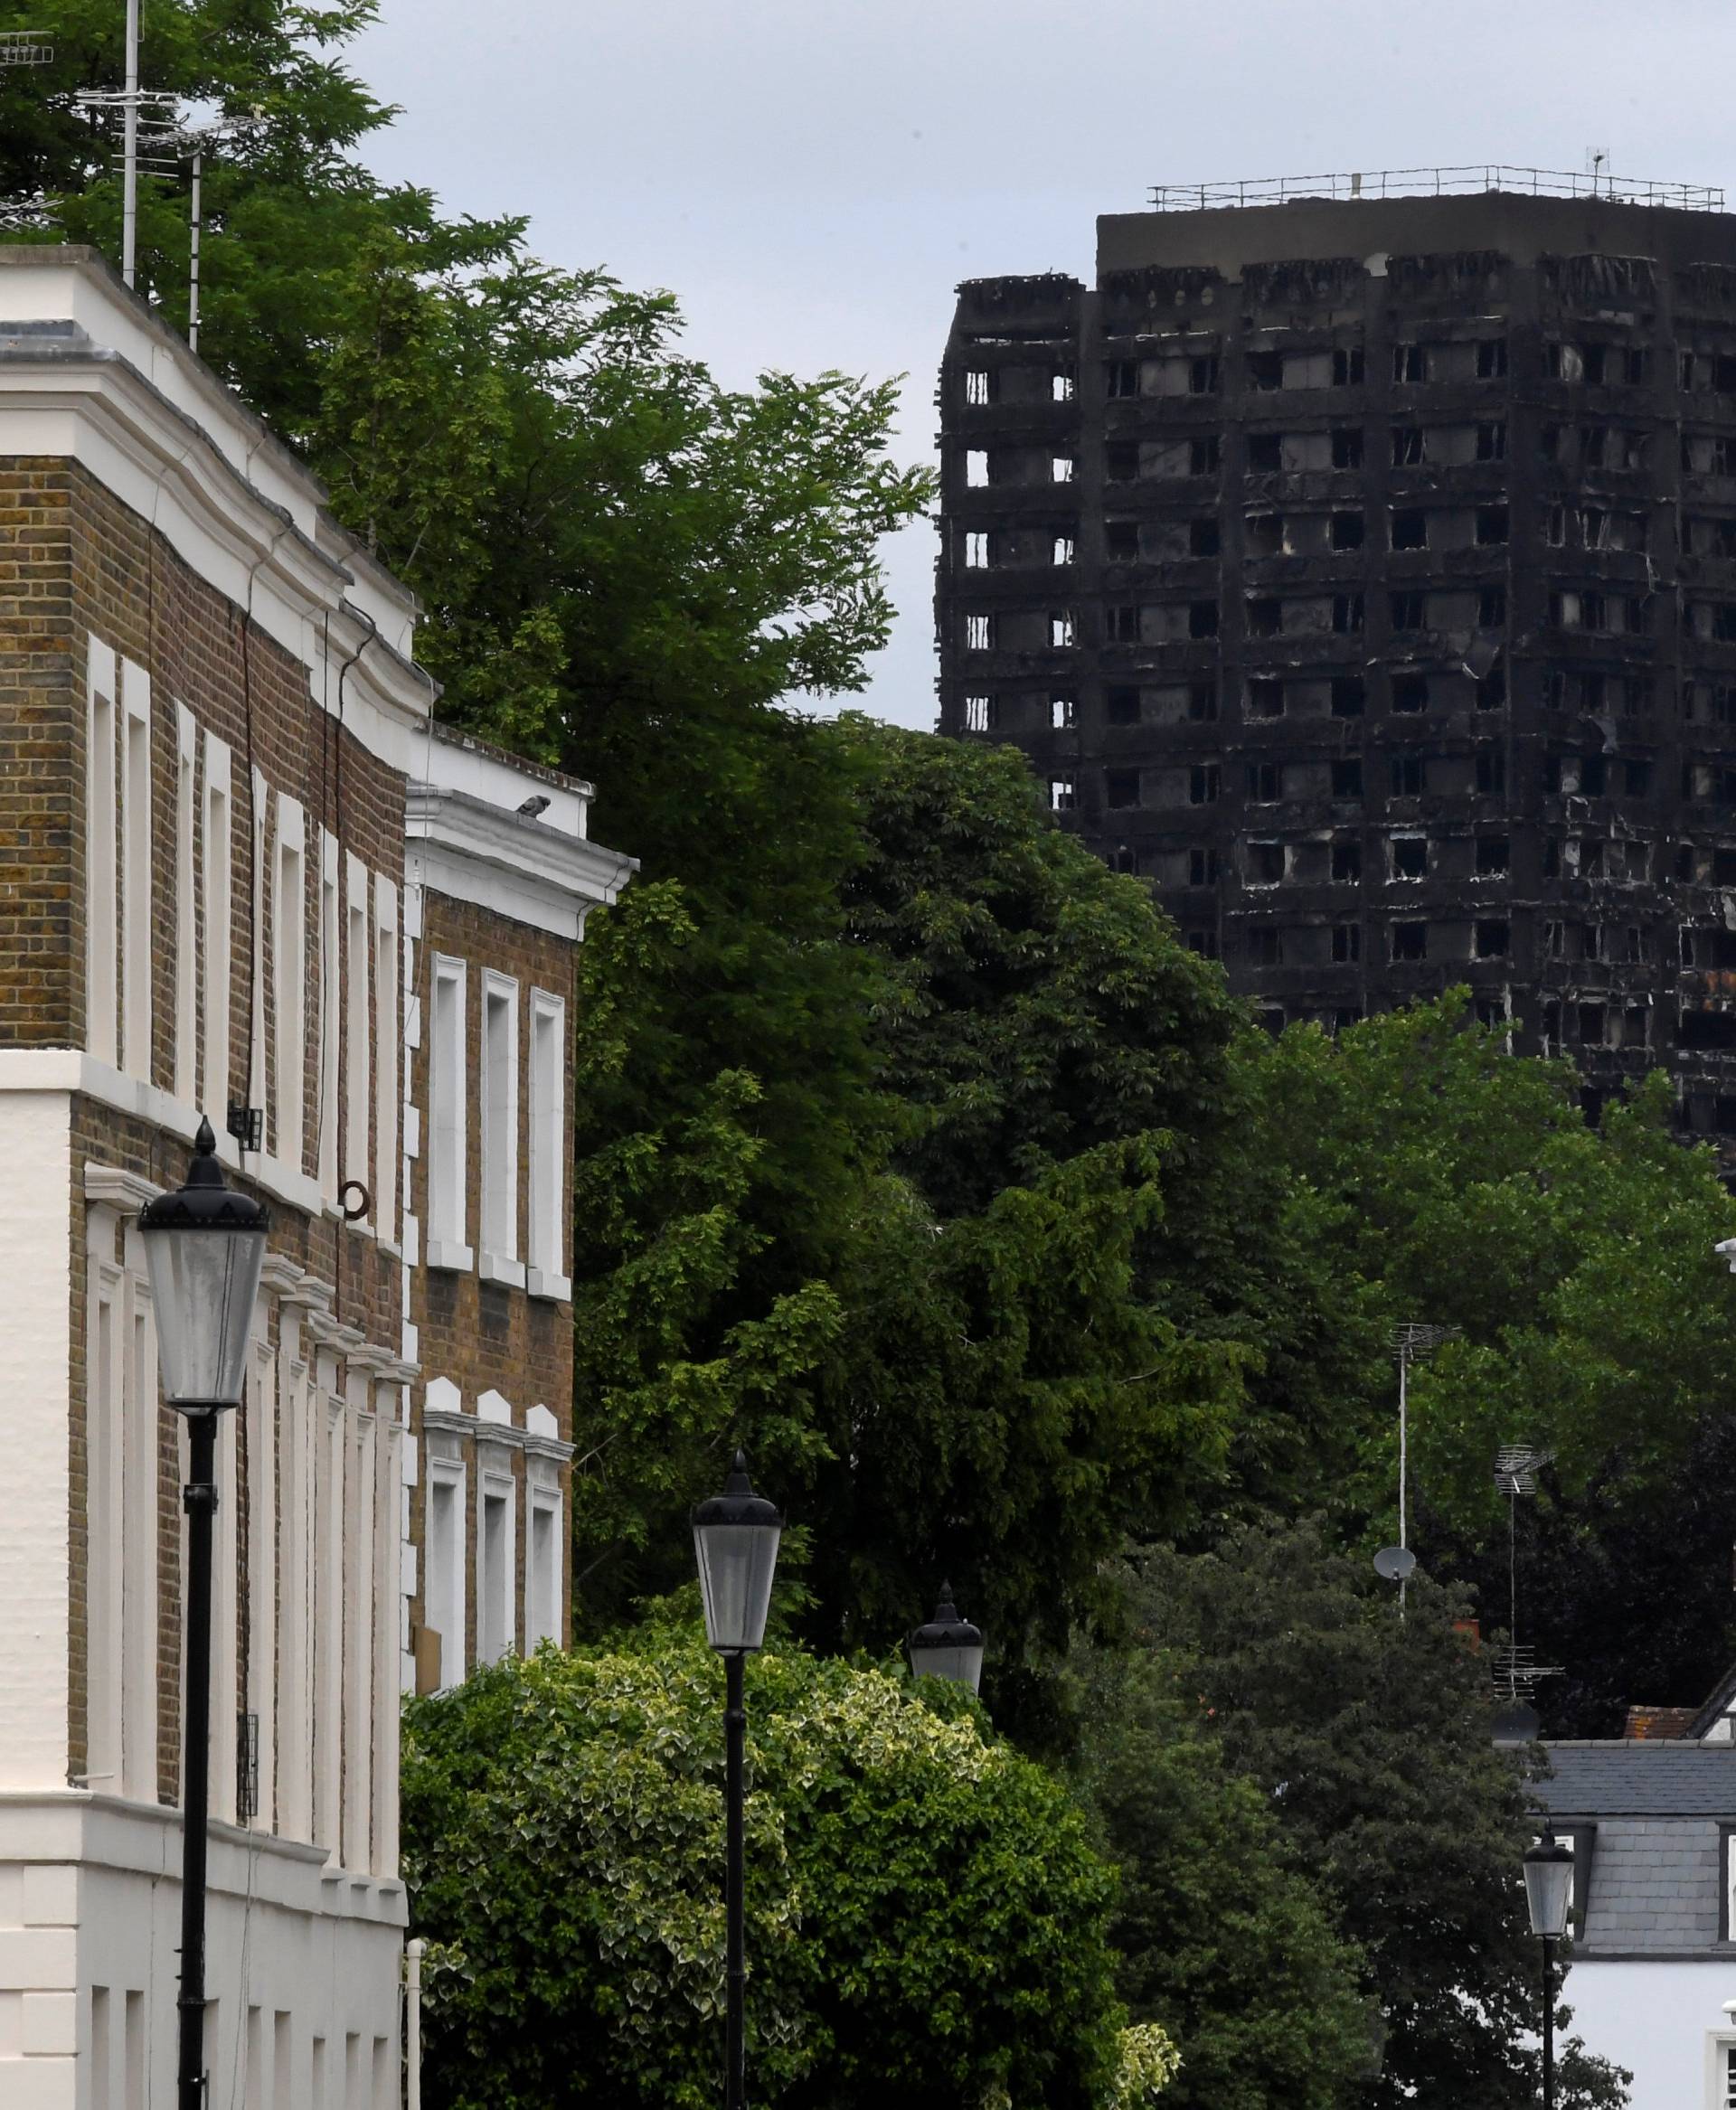 A view of Grenfell Tower from the wealthy area of Holland park in London